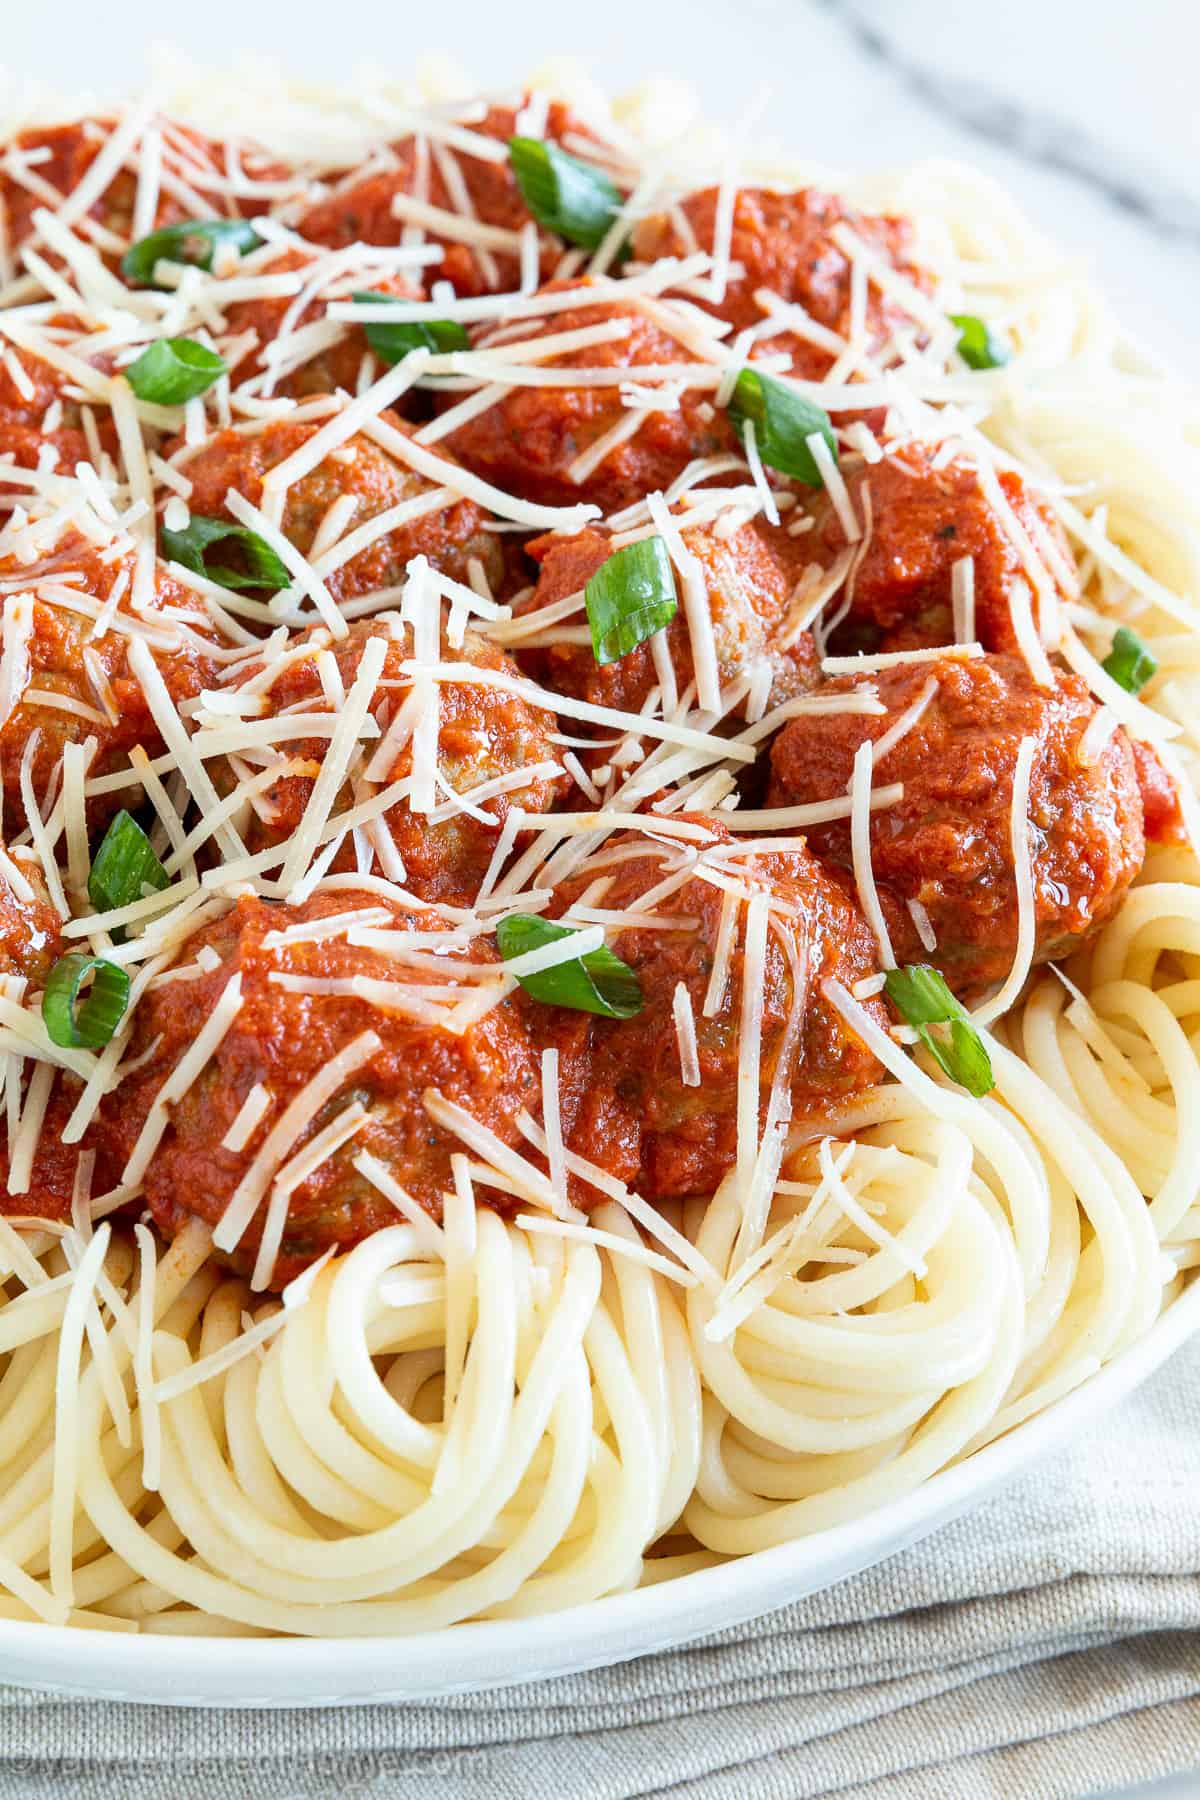 You’ll get classic tomato flavors, thanks to the marinara sauce, and a hearty meal because of the tasty meatballs that make up this recipe.